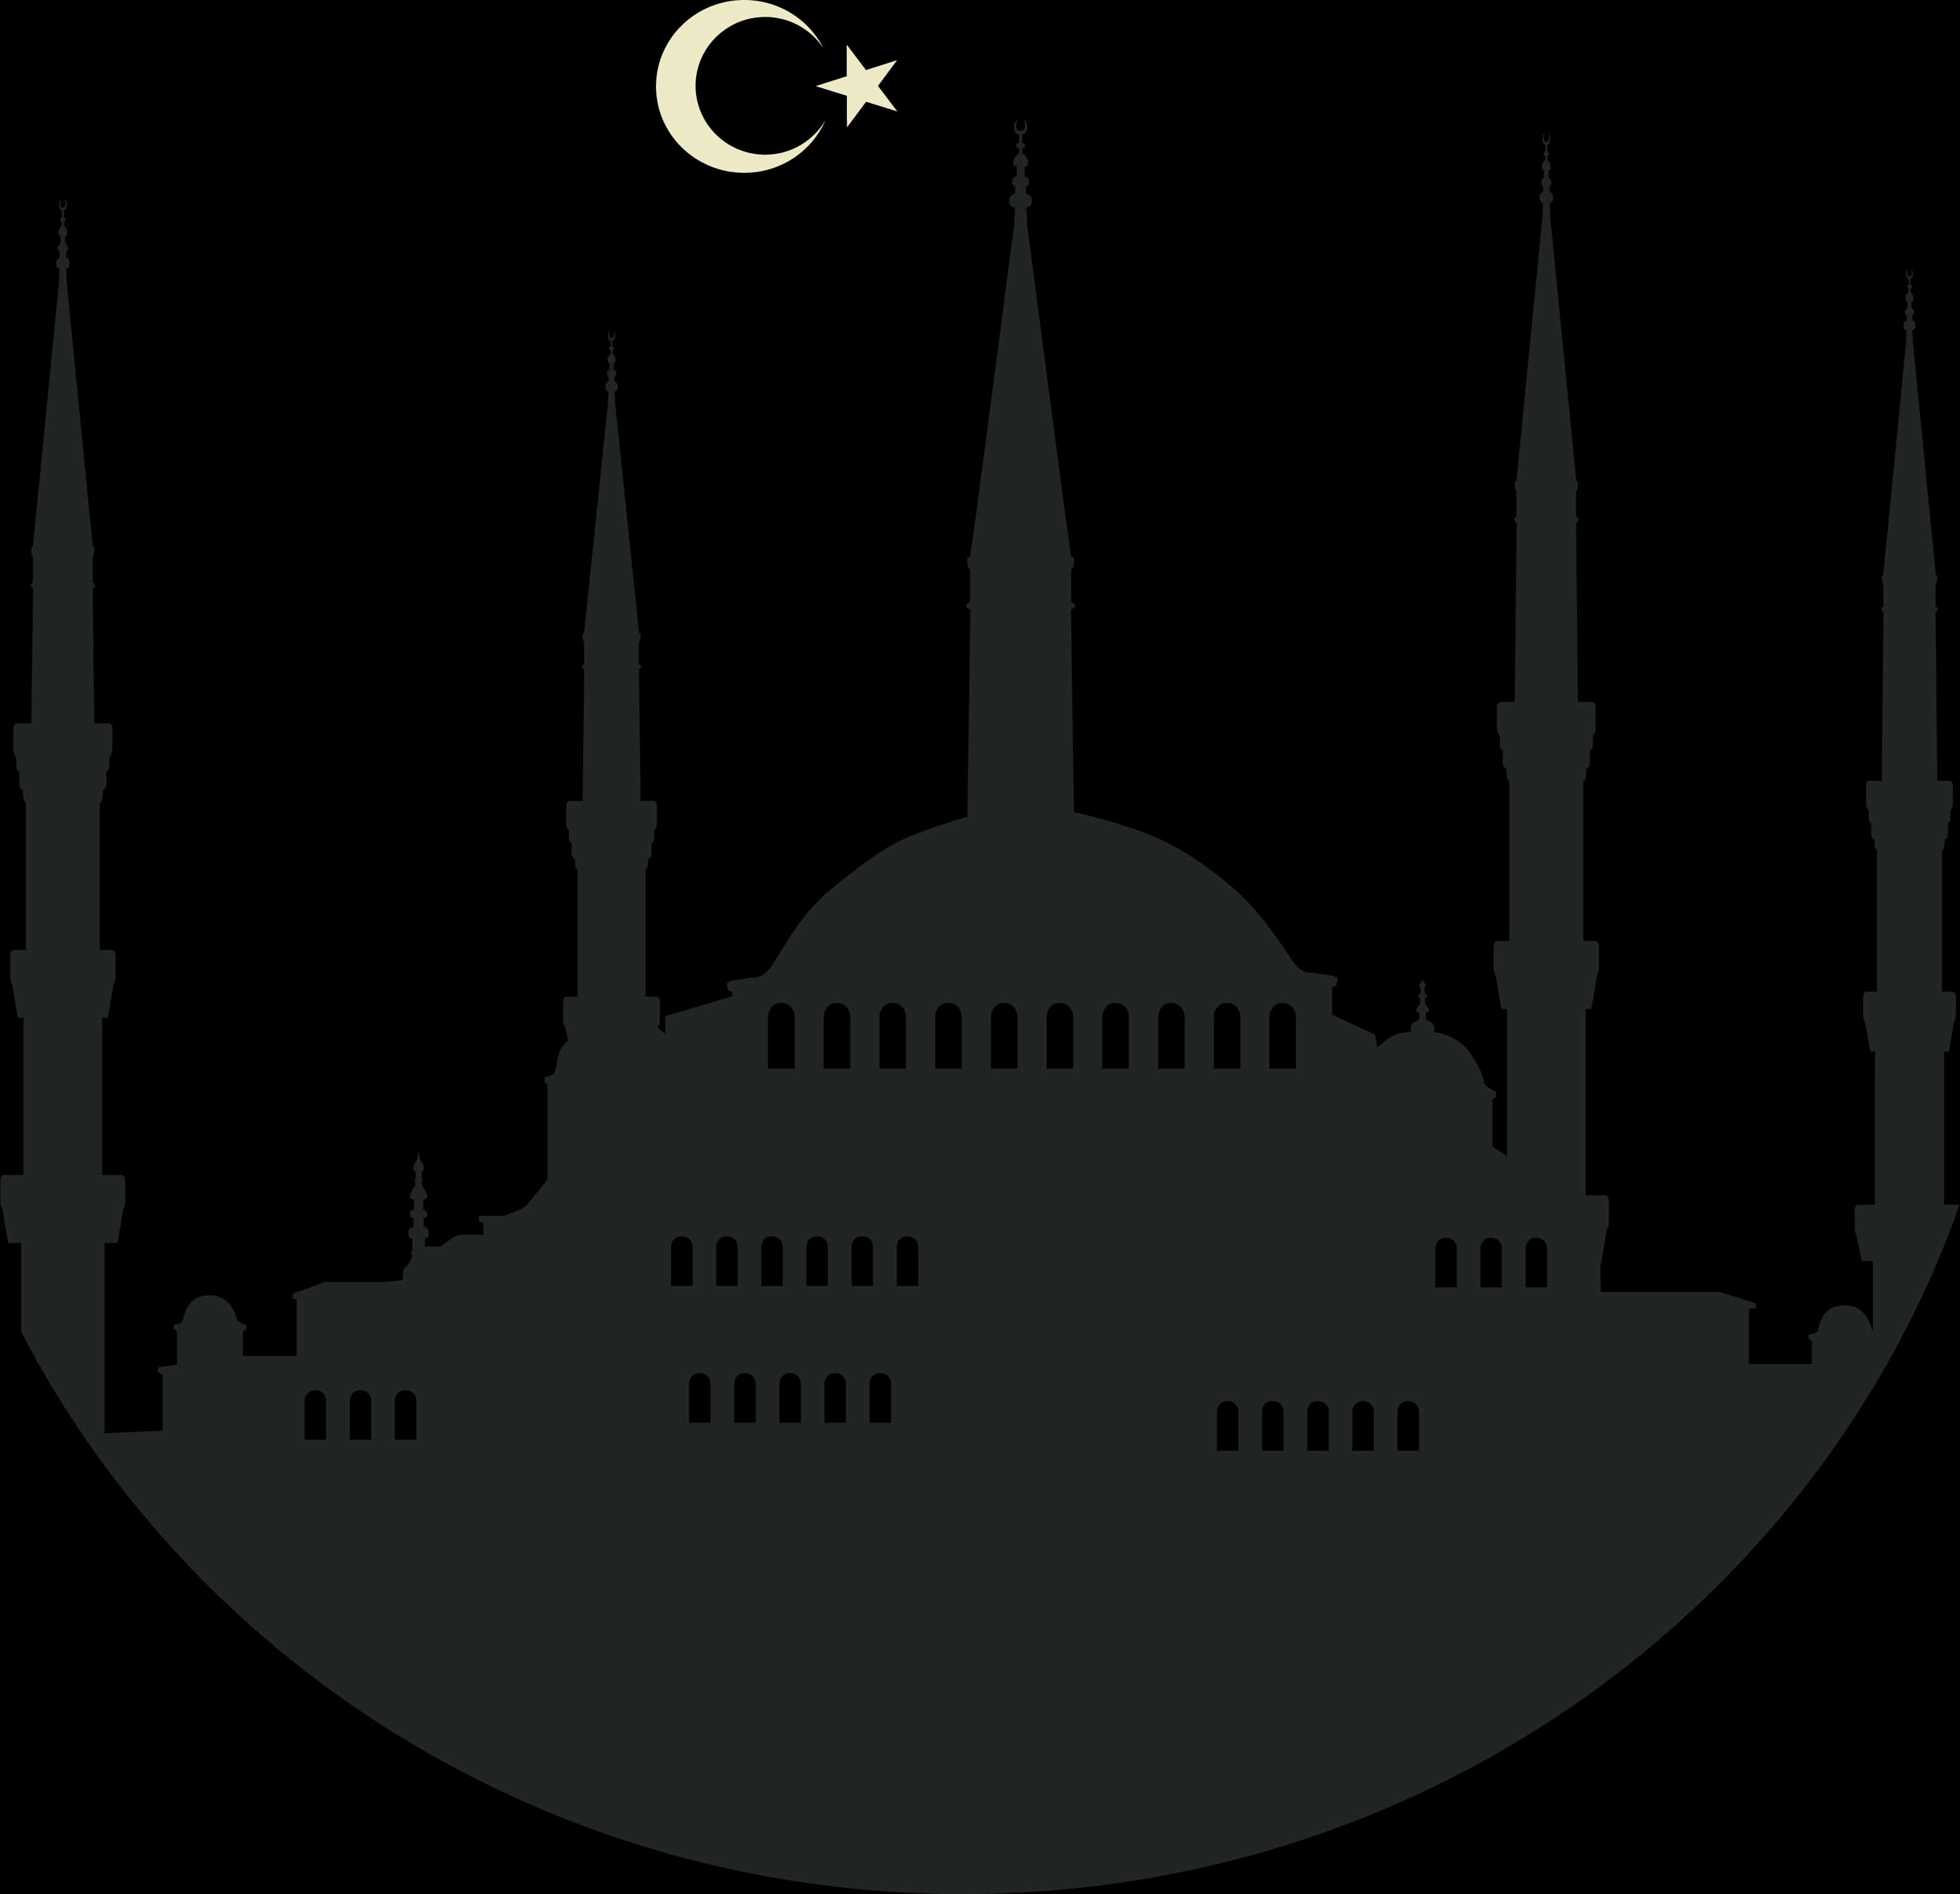 A Silhouette Of A Building With A Crescent Moon